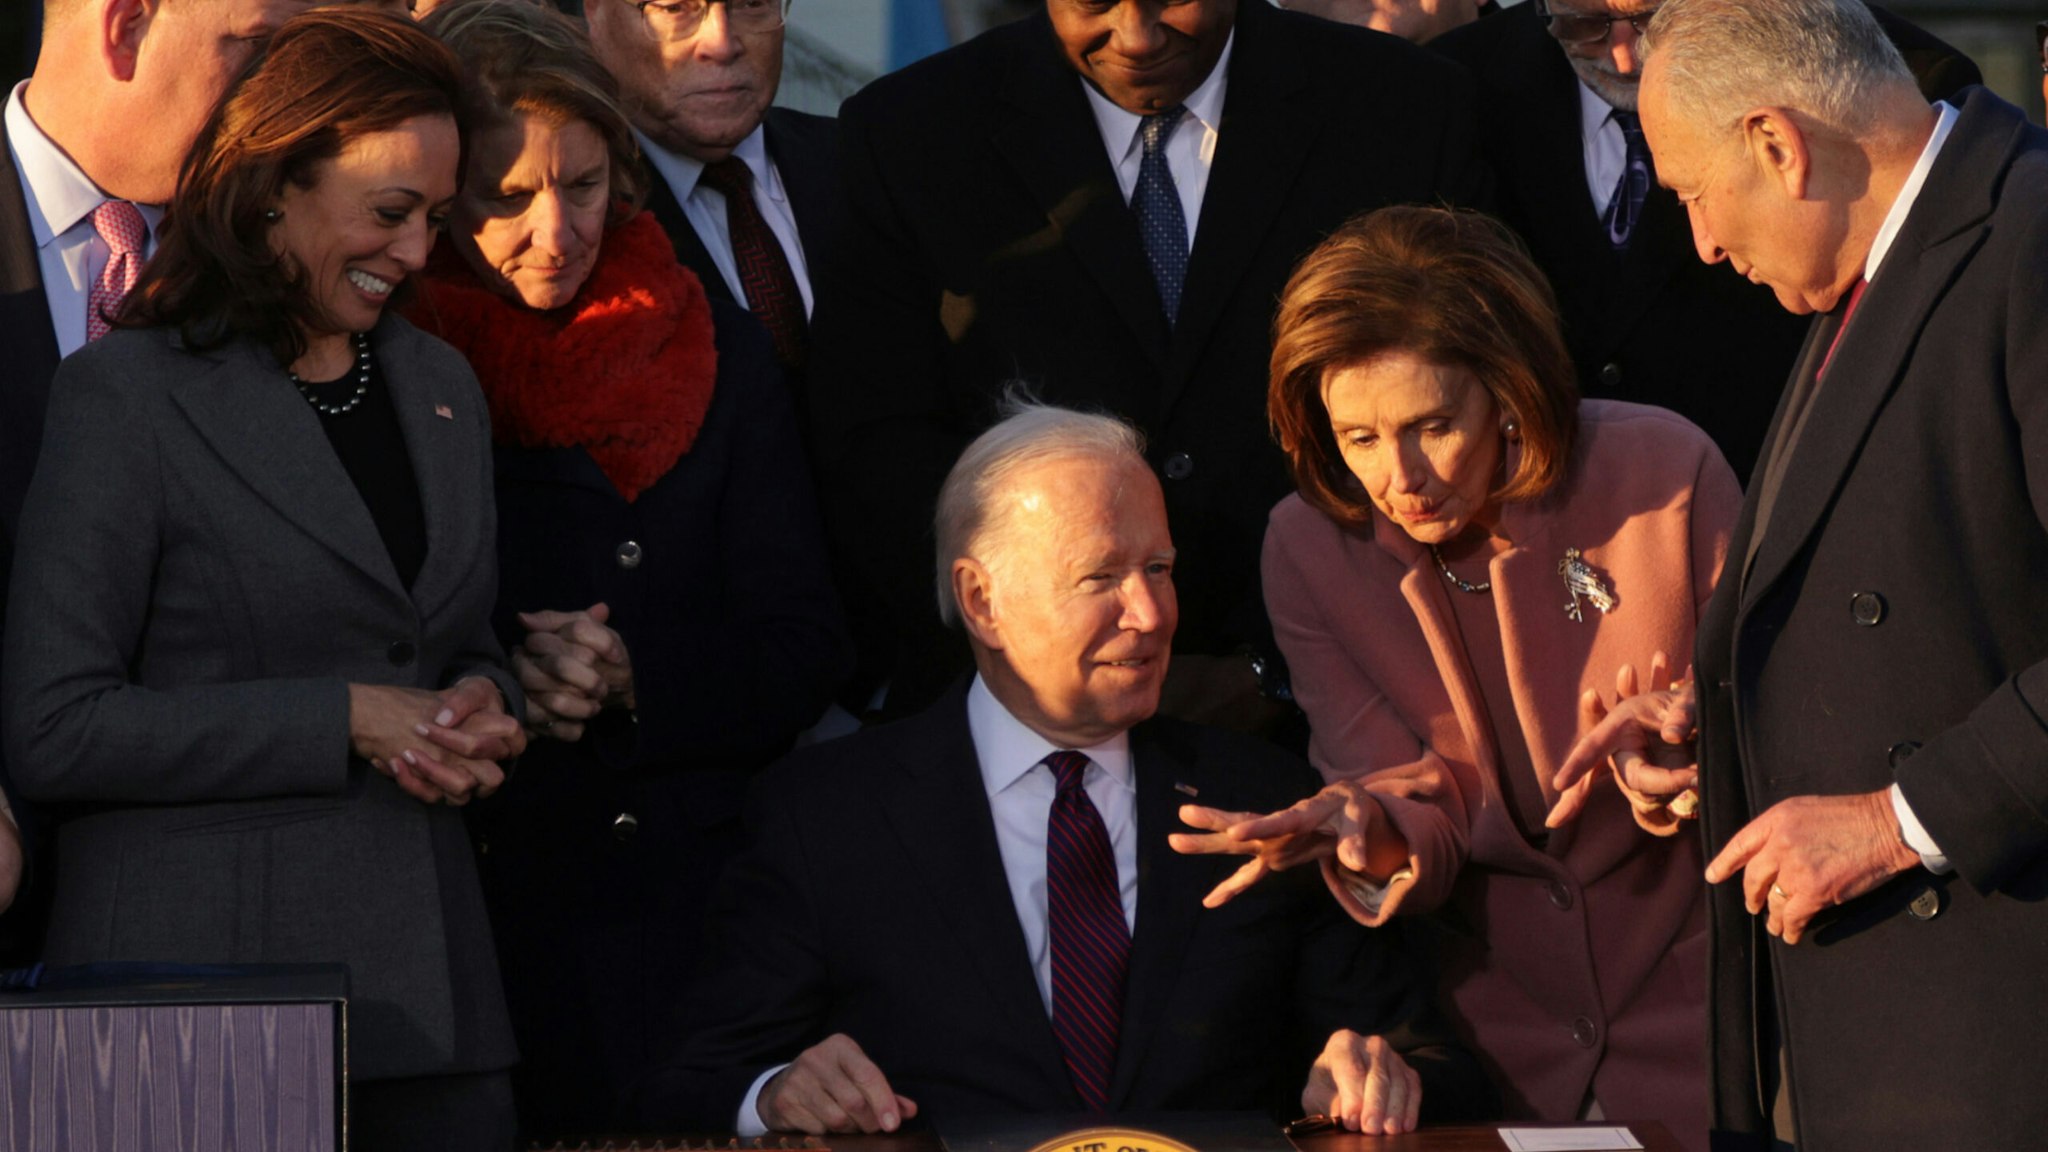 U.S. President Joe Biden (3rd-R) talks to Speaker of the House Rep. Nancy Pelosi (D-CA) (2nd-R) as Senate Majority Leader Sen. Chuck Schumer (D-NY) (R) and Vice President Kamala Harris (L) look on after signing the Infrastructure Investment and Jobs Act as he is surrounded by lawmakers and members of his Cabinet during a ceremony on the South Lawn at the White House on November 15, 2021 in Washington, DC.